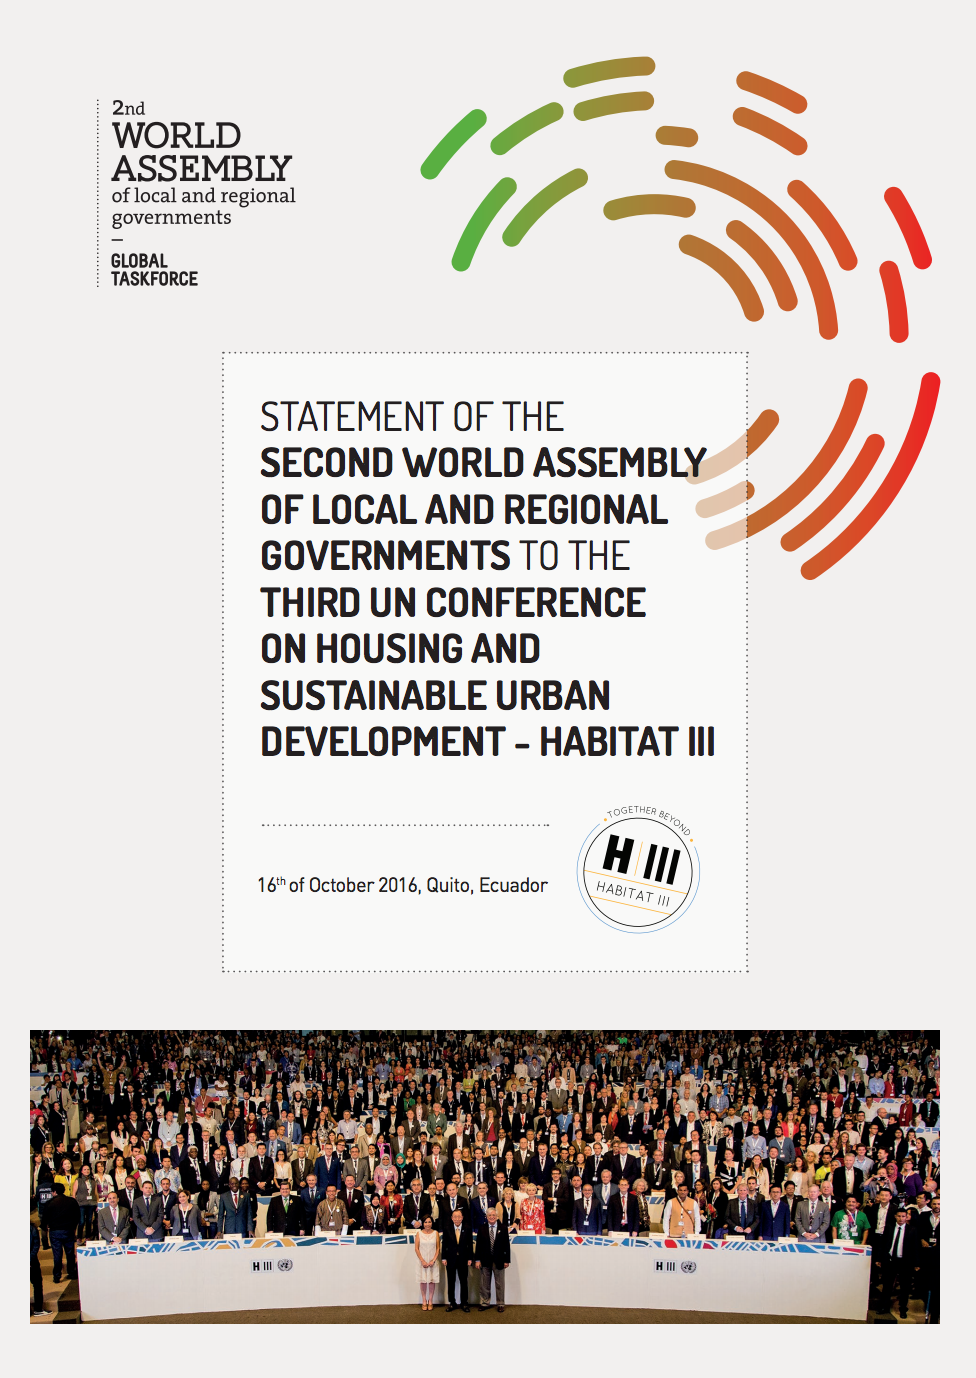 Statement of the Second World Assembly to Habitat III